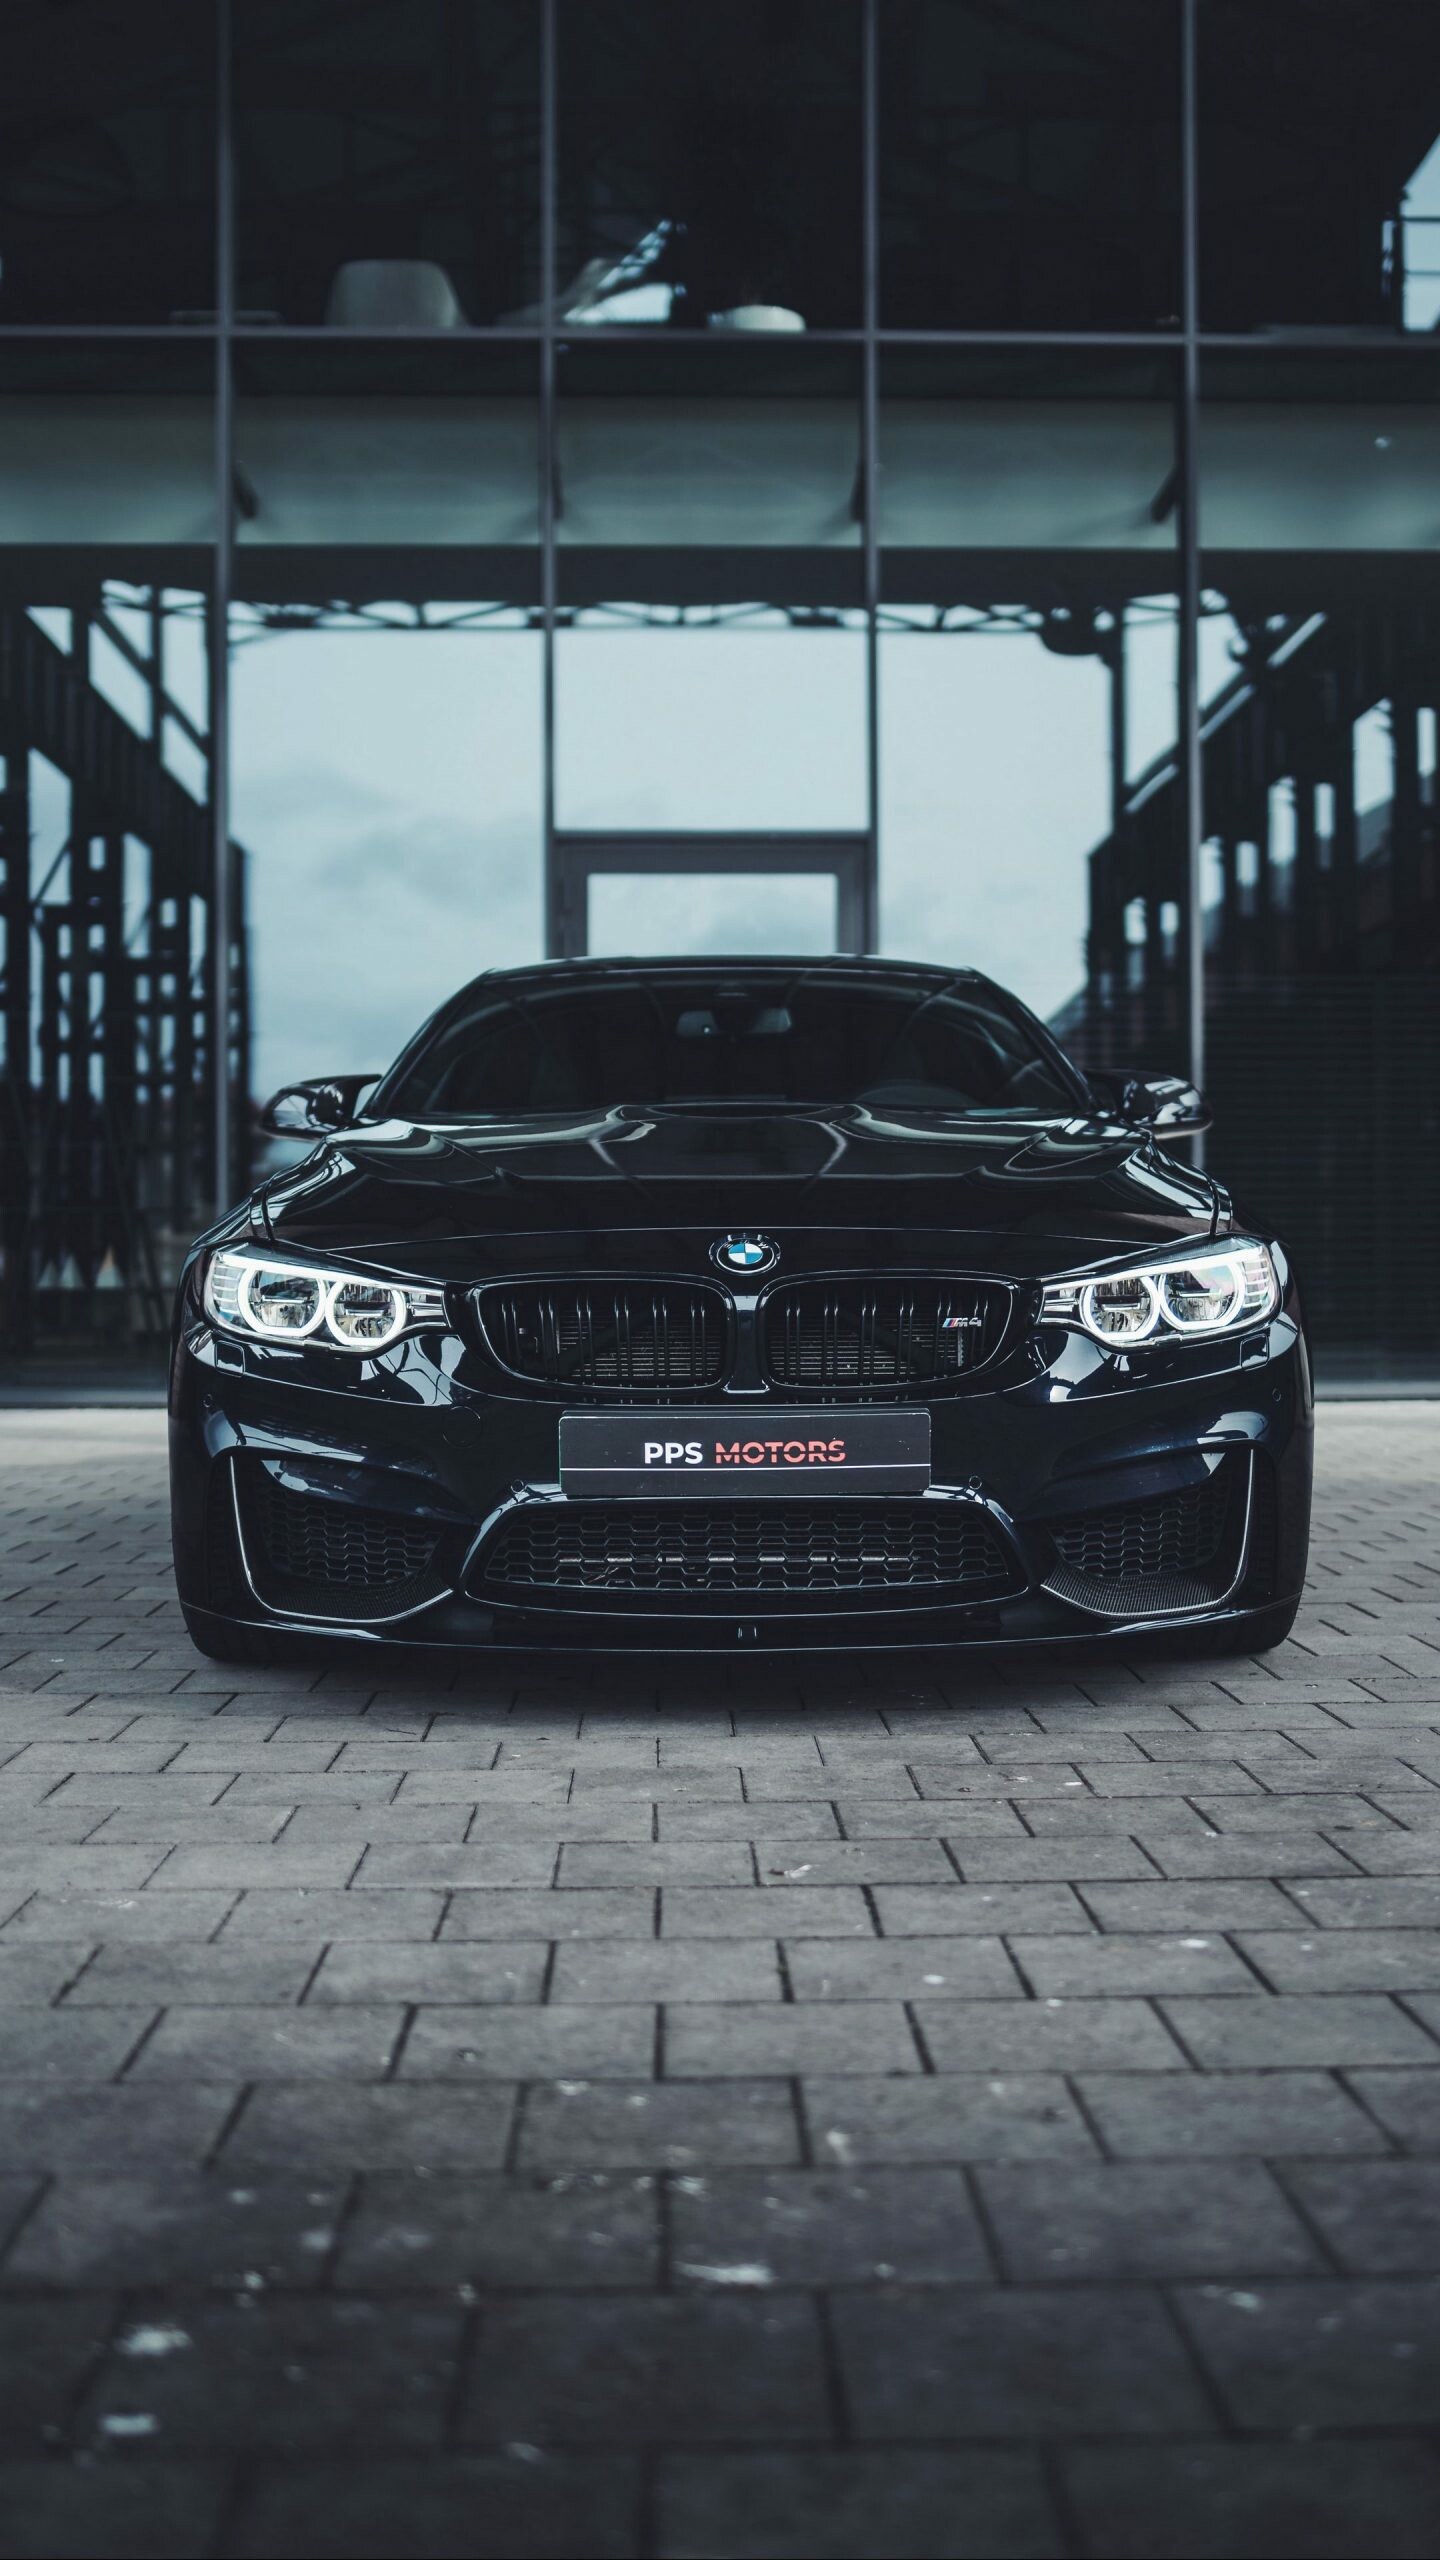 BMW: Known for making ultramodern luxury cars with the latest features and technologies. 1440x2560 HD Background.